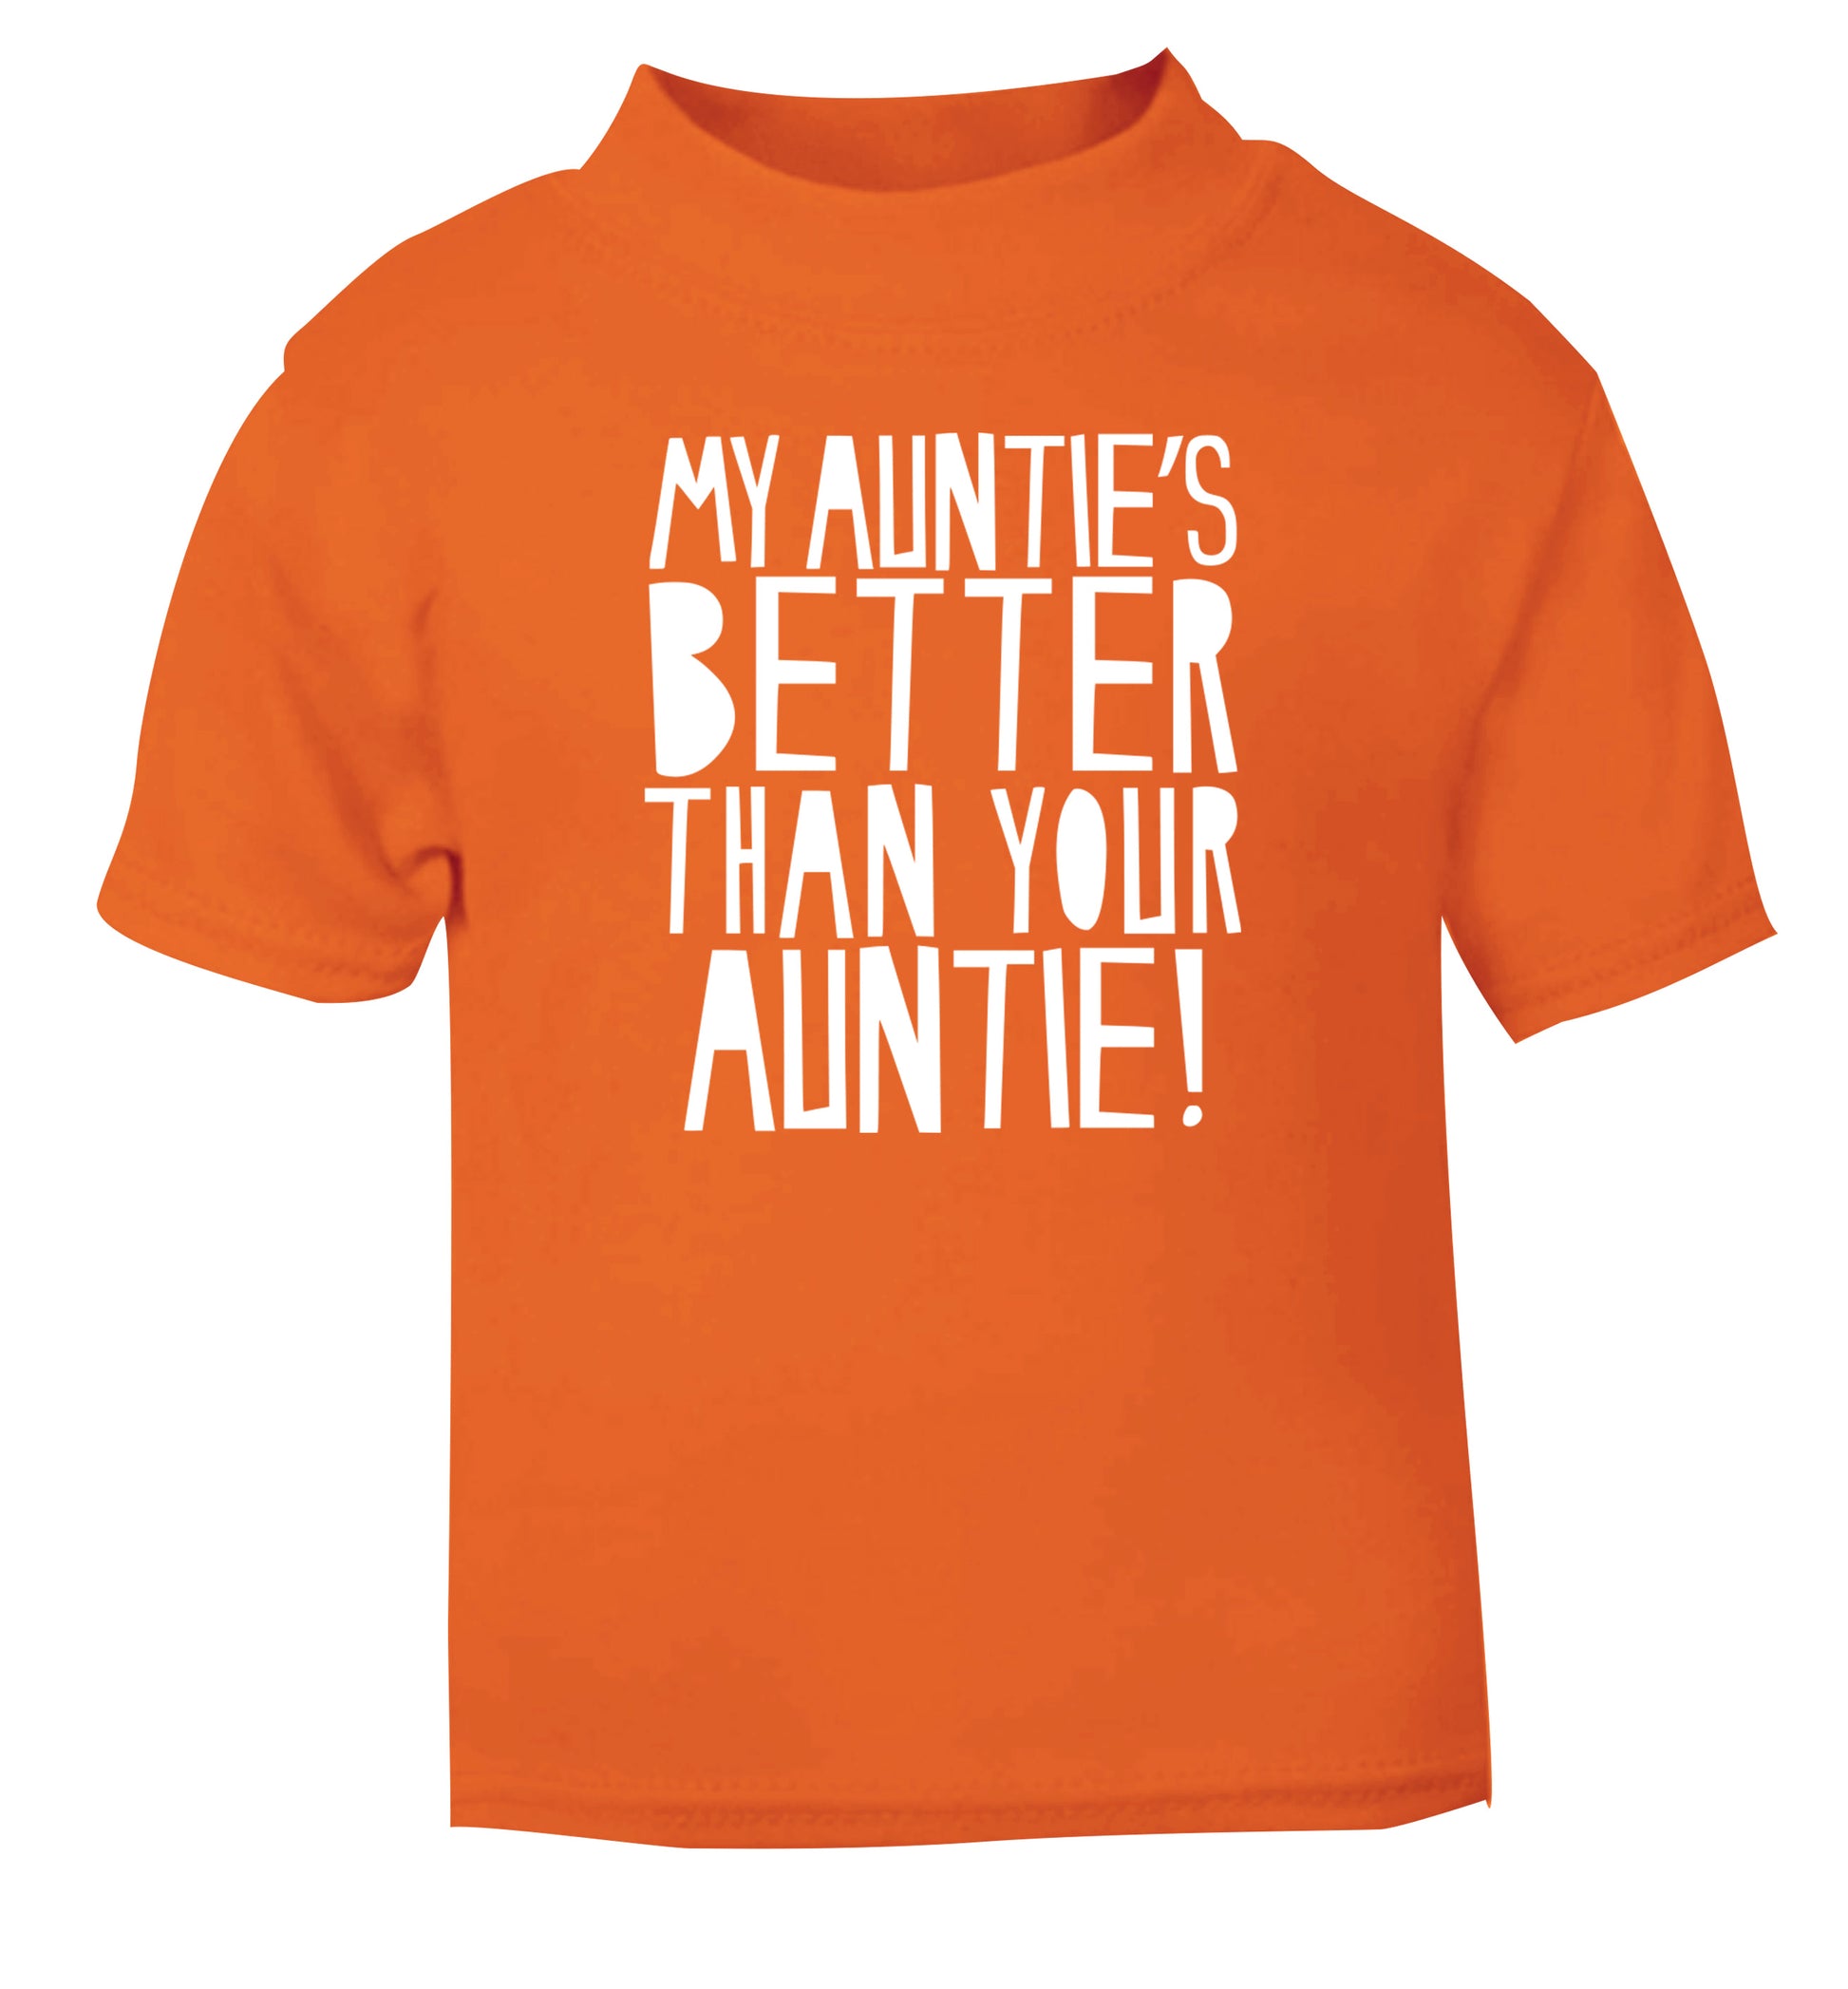 My auntie's better than your auntie orange Baby Toddler Tshirt 2 Years